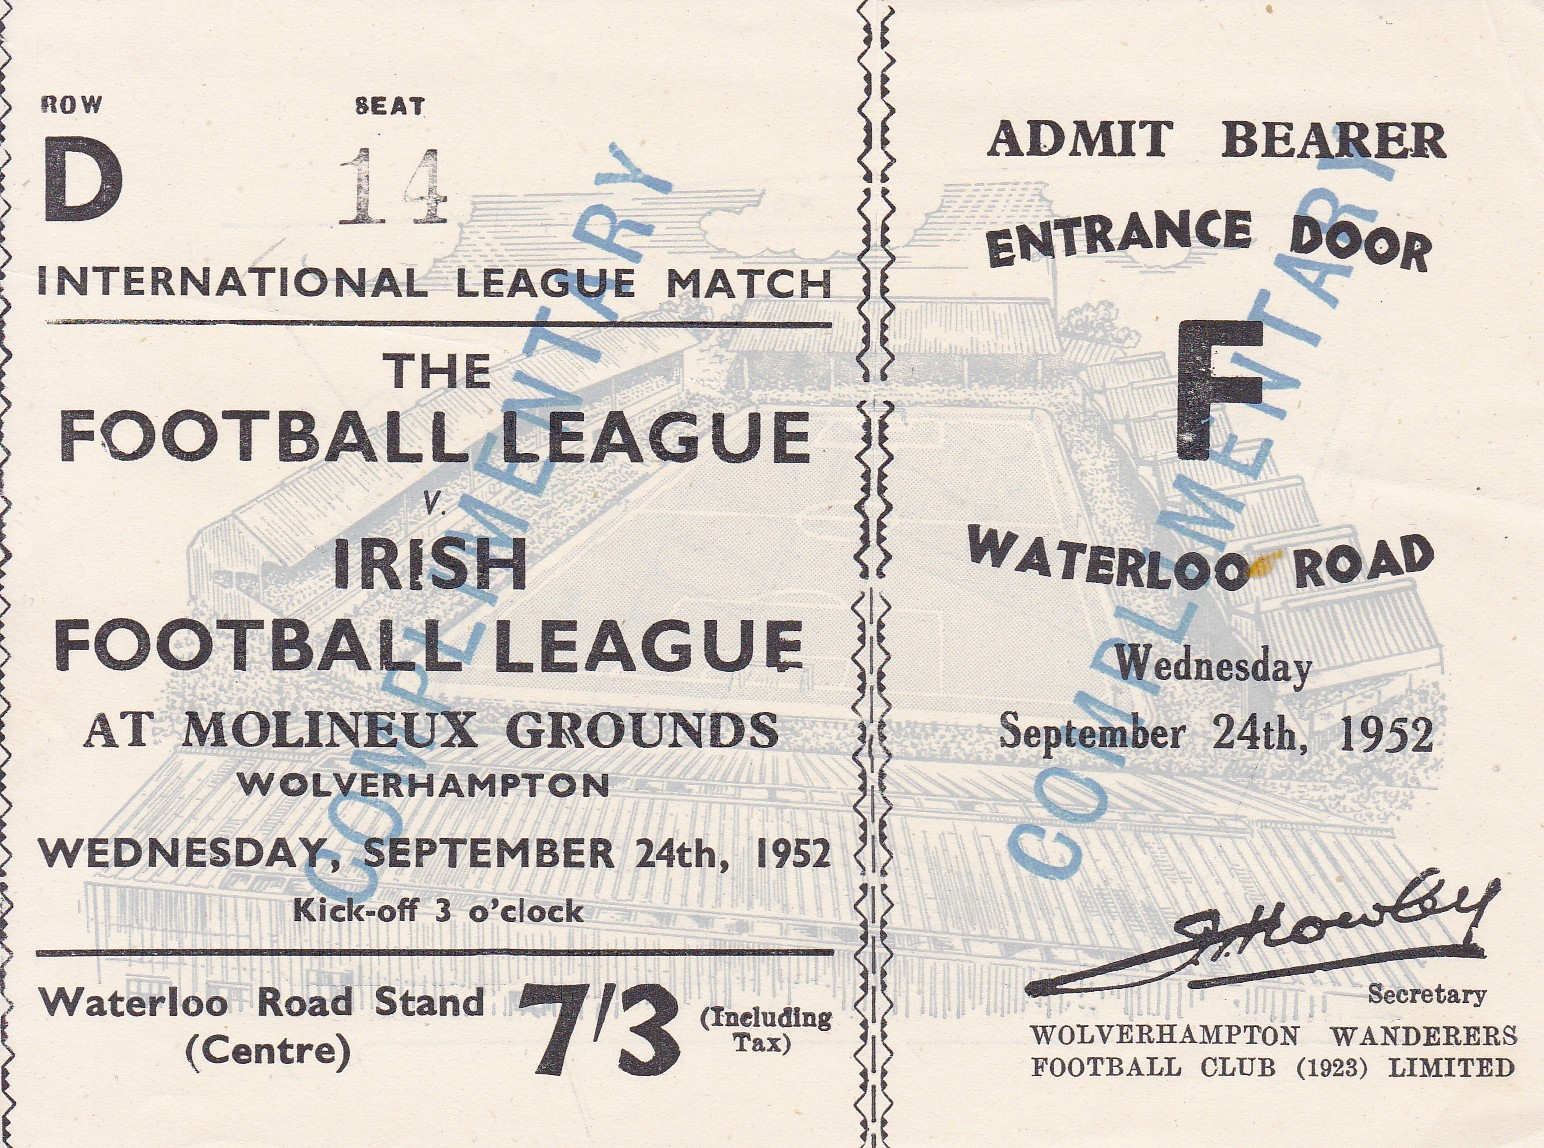 TICKET-1952 - WOLVES Ticket complete with counterfoil, Football League v Irish League, 24/9/52 at - Image 2 of 3